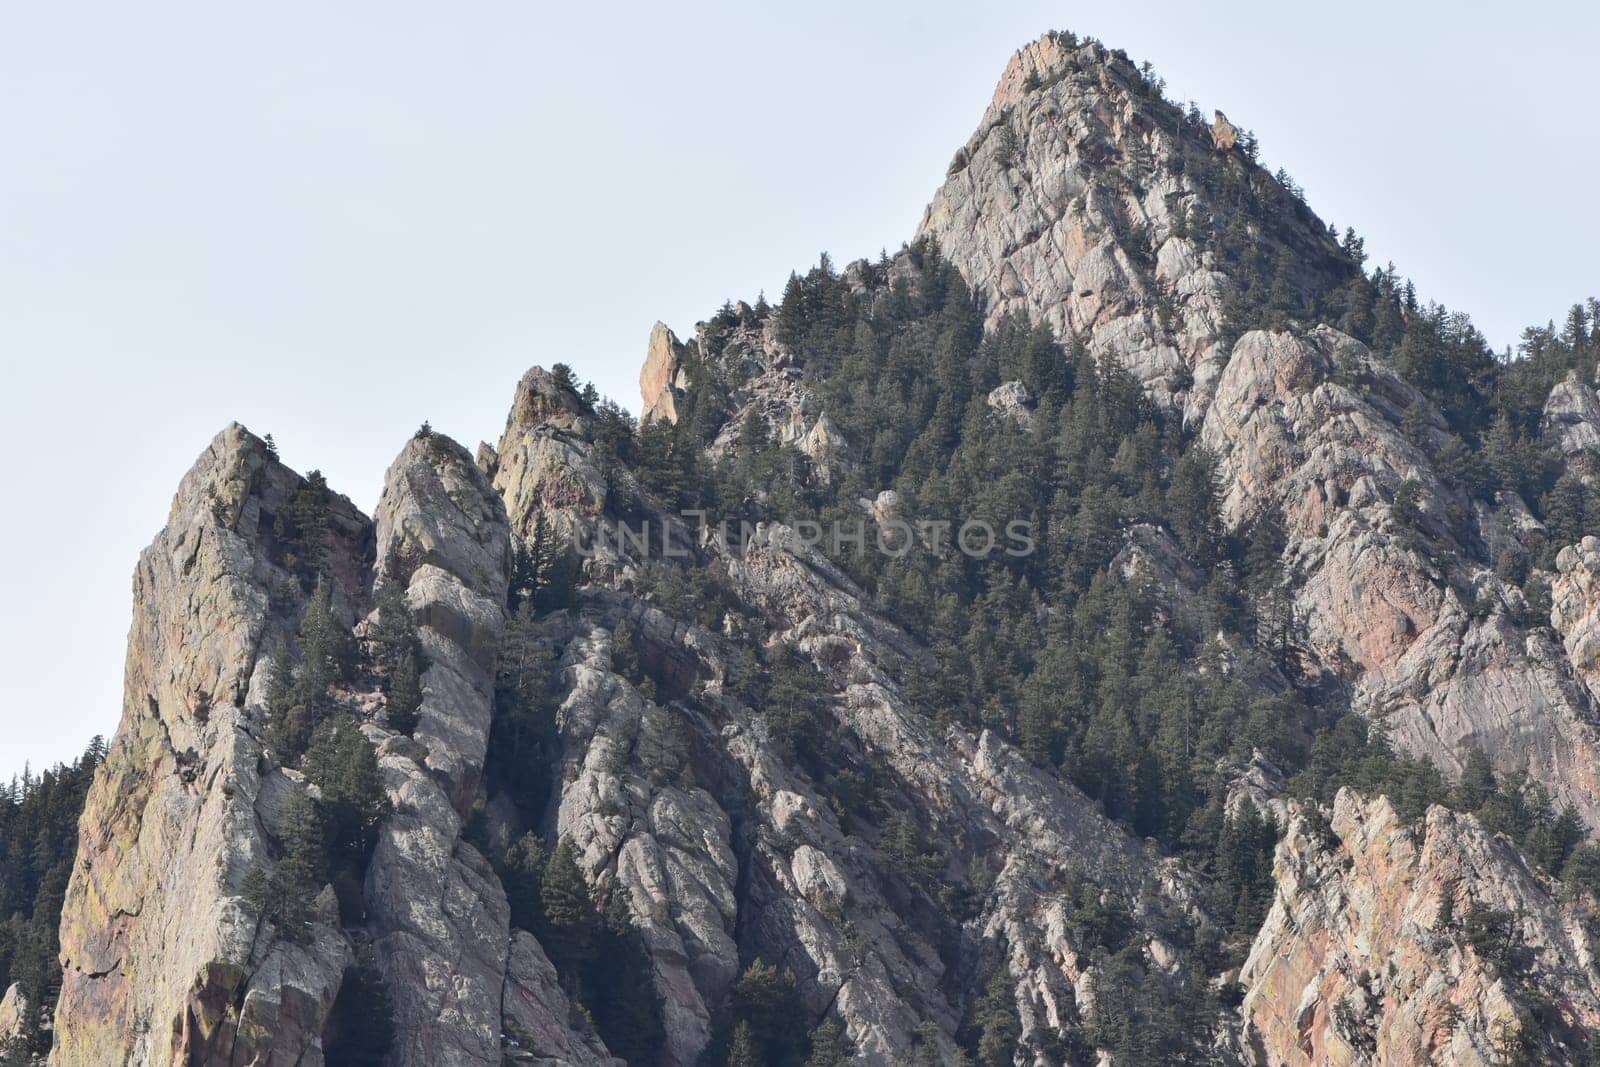 Beautiful Rocky Landscape View, Hiking on Fowler Trail Near Boulder, Colorado. High quality photo